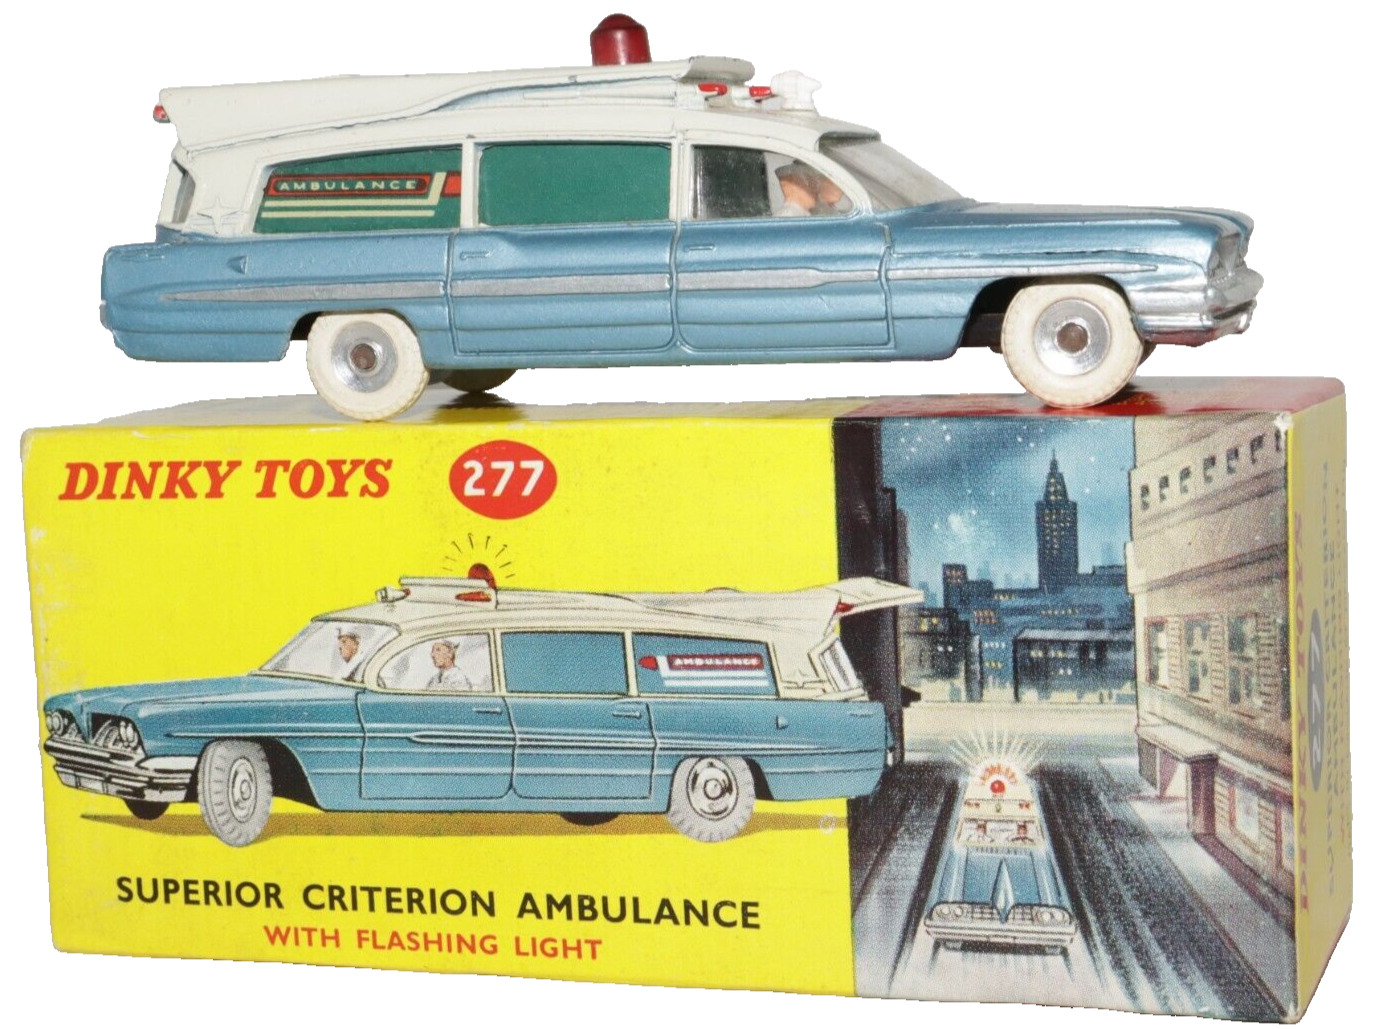 Dinky Toys No 277 Superior Criterion Ambulance Meccano Ltd Made In England Boxed